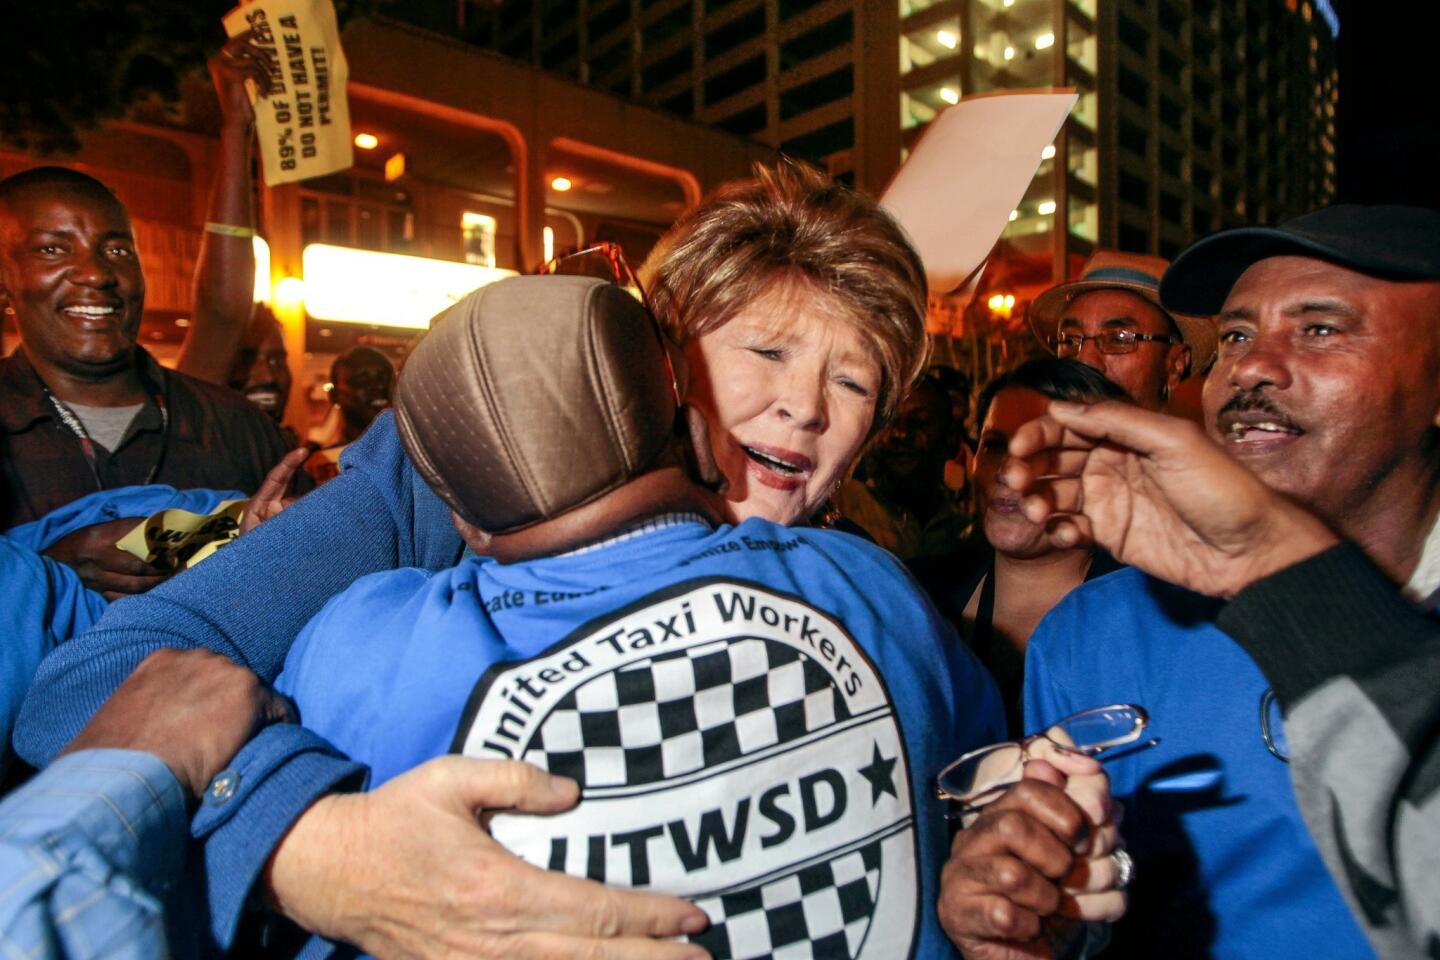 San Diego City Councilwoman Marti Emerald receives a hug while she is swarmed by cab drivers as they celebrate.